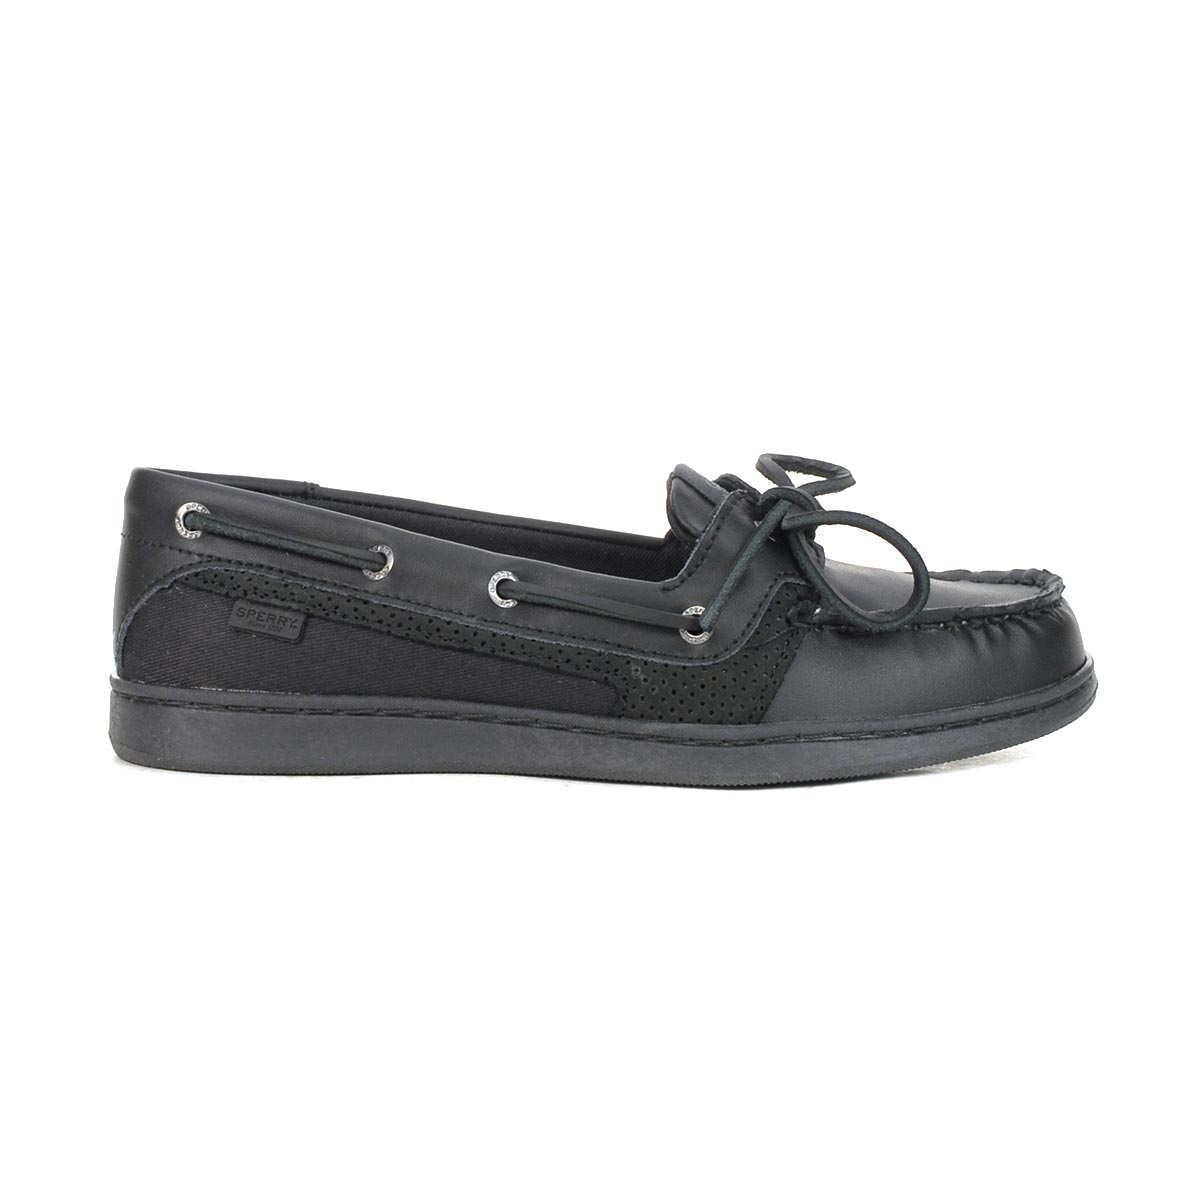 Sperry Men's Starfish Perforated Black Boat Shoes STS88007 - WOOKI.COM